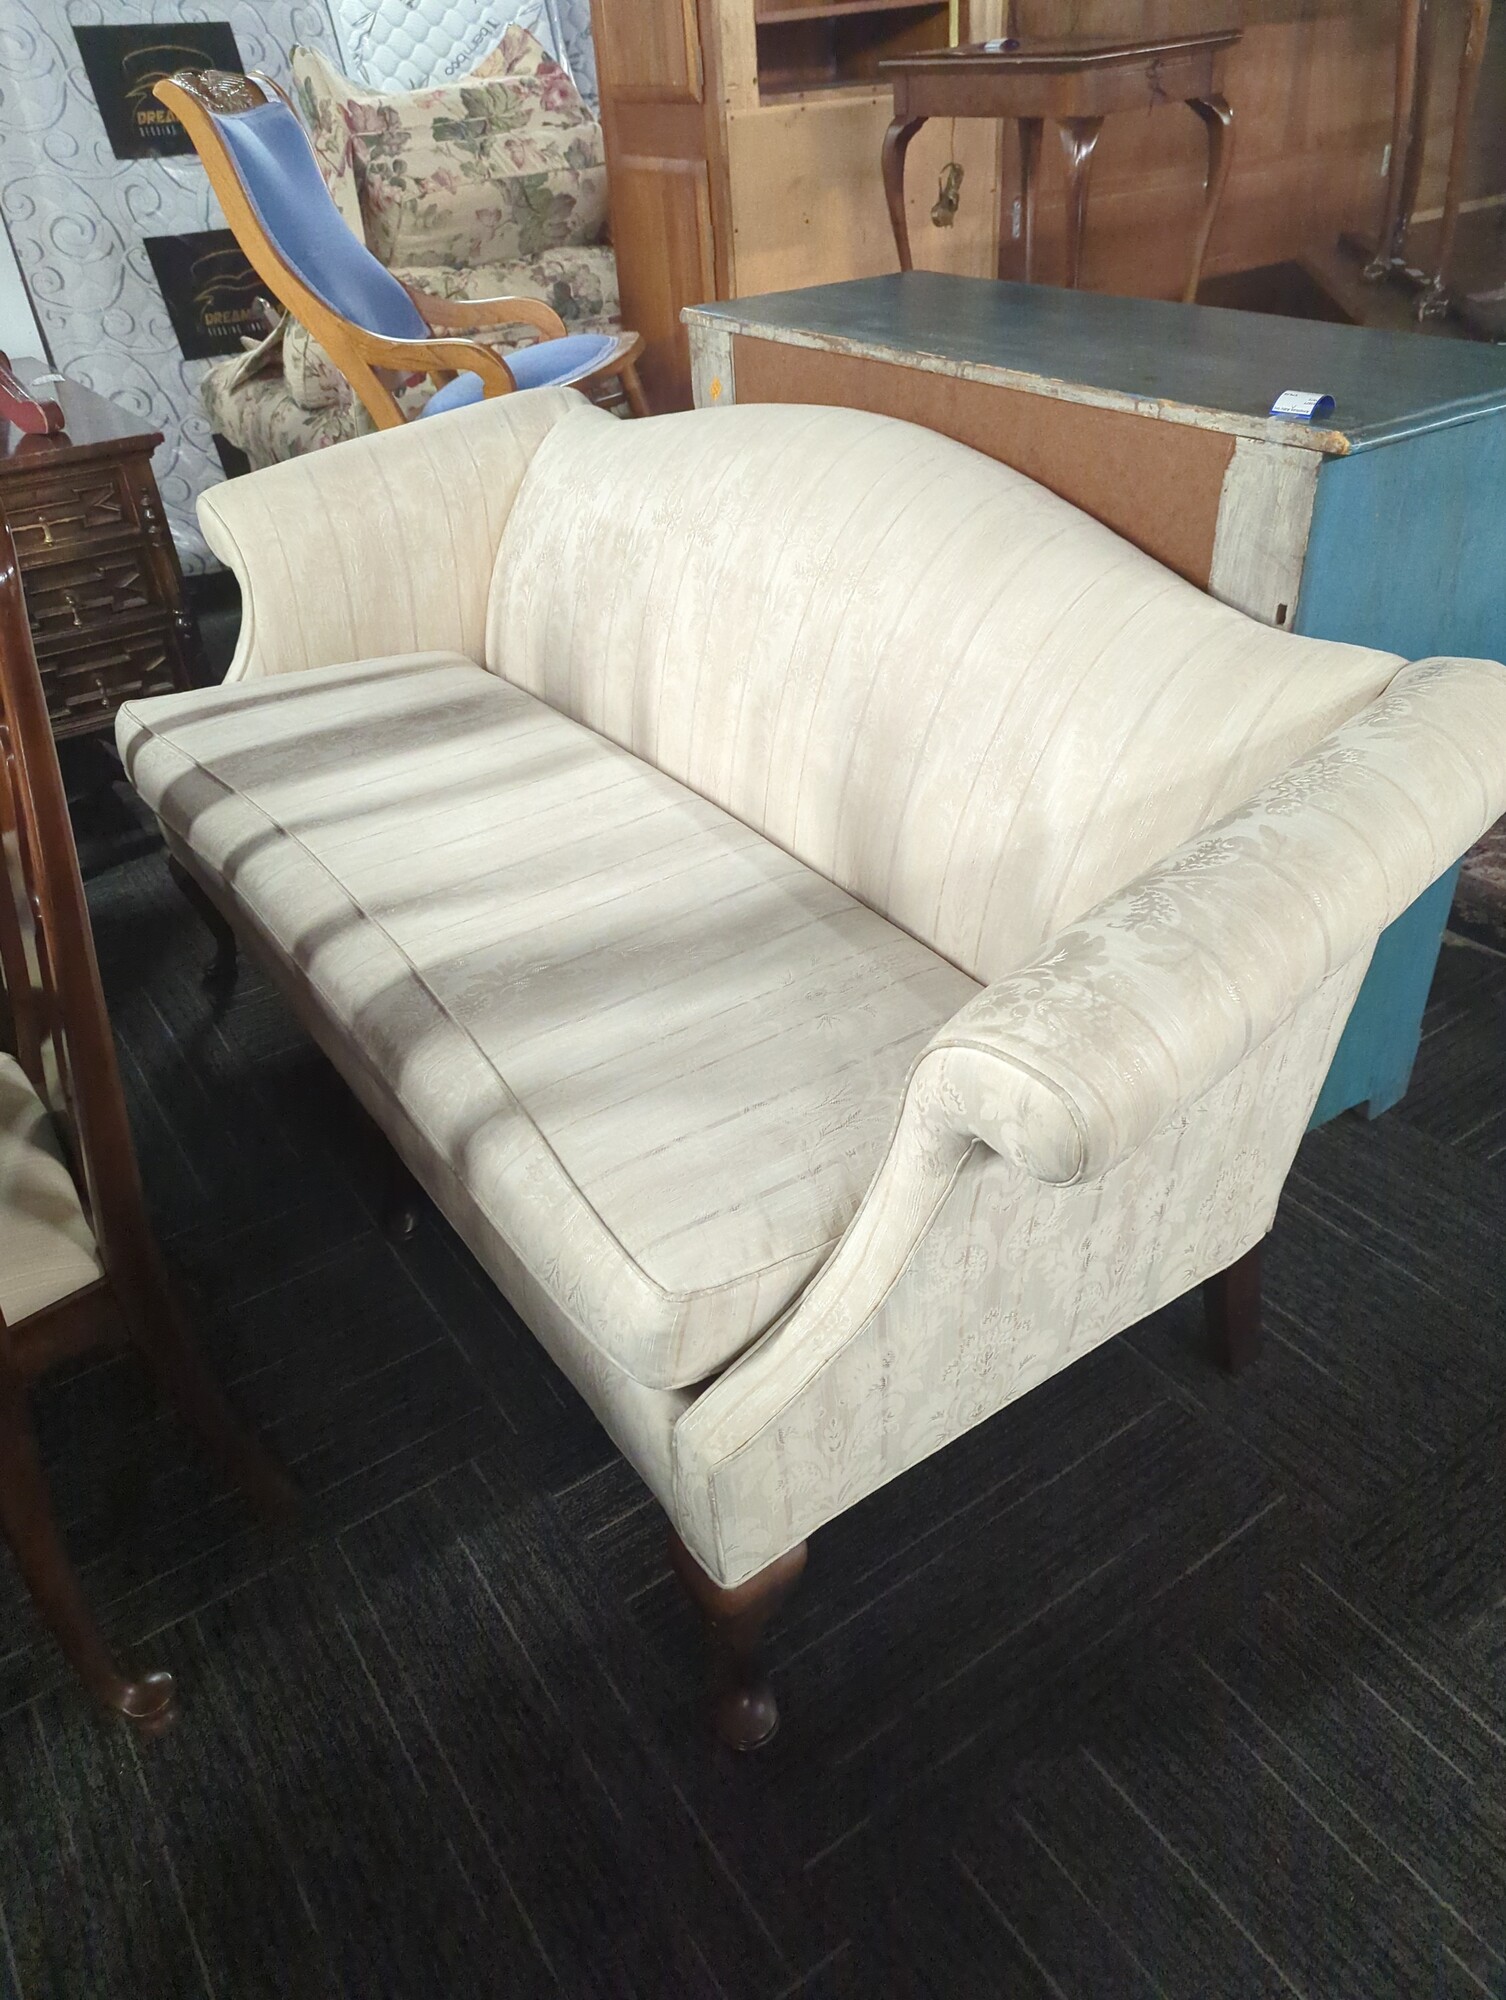 Vintage formal sofa. Needs some spot cleaning. 74in wide.